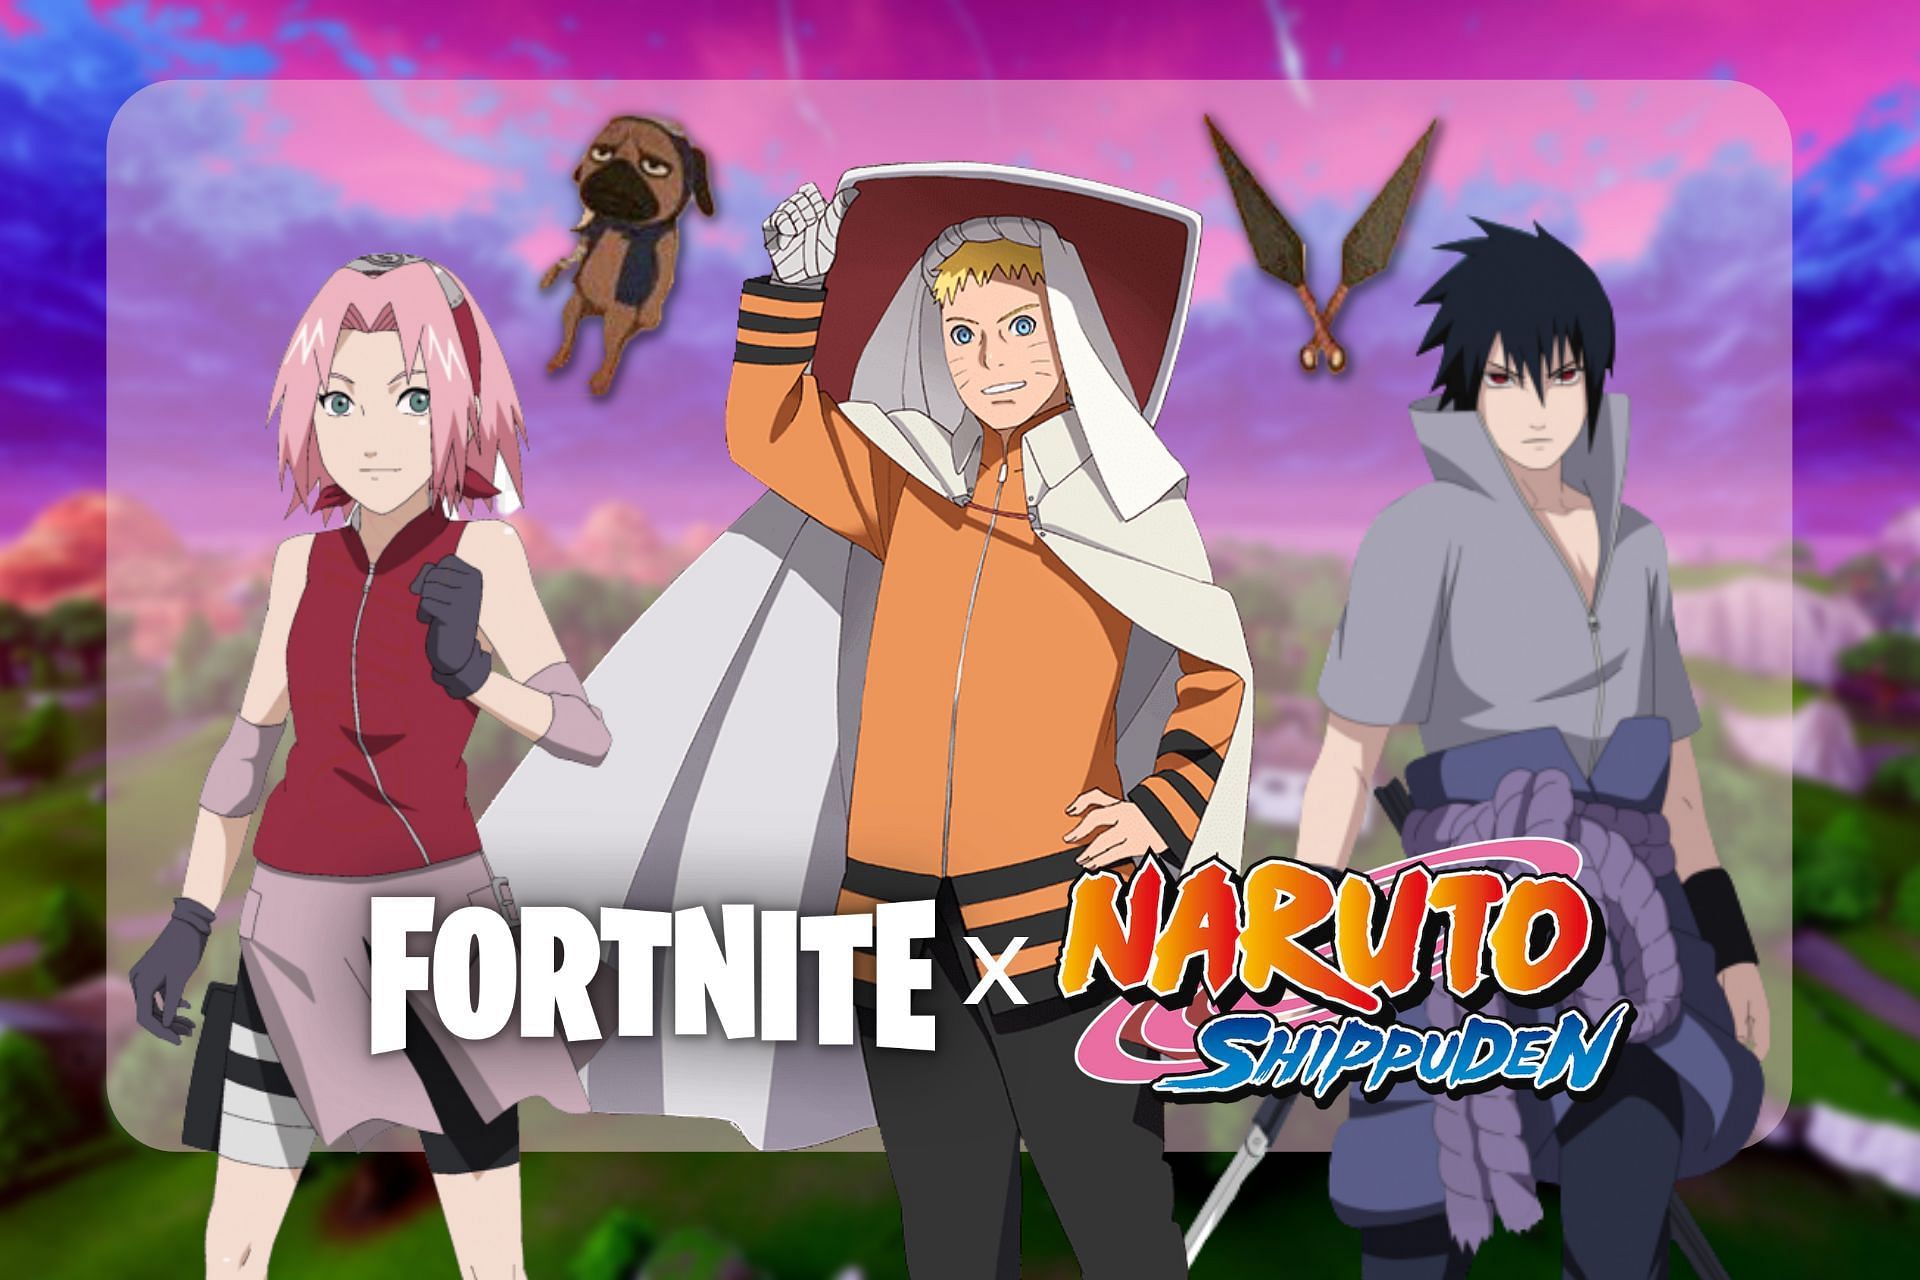 Fortnite x Naruto leaks reveal much detail about the upcoming collaboration (Image via Sportskeeda)